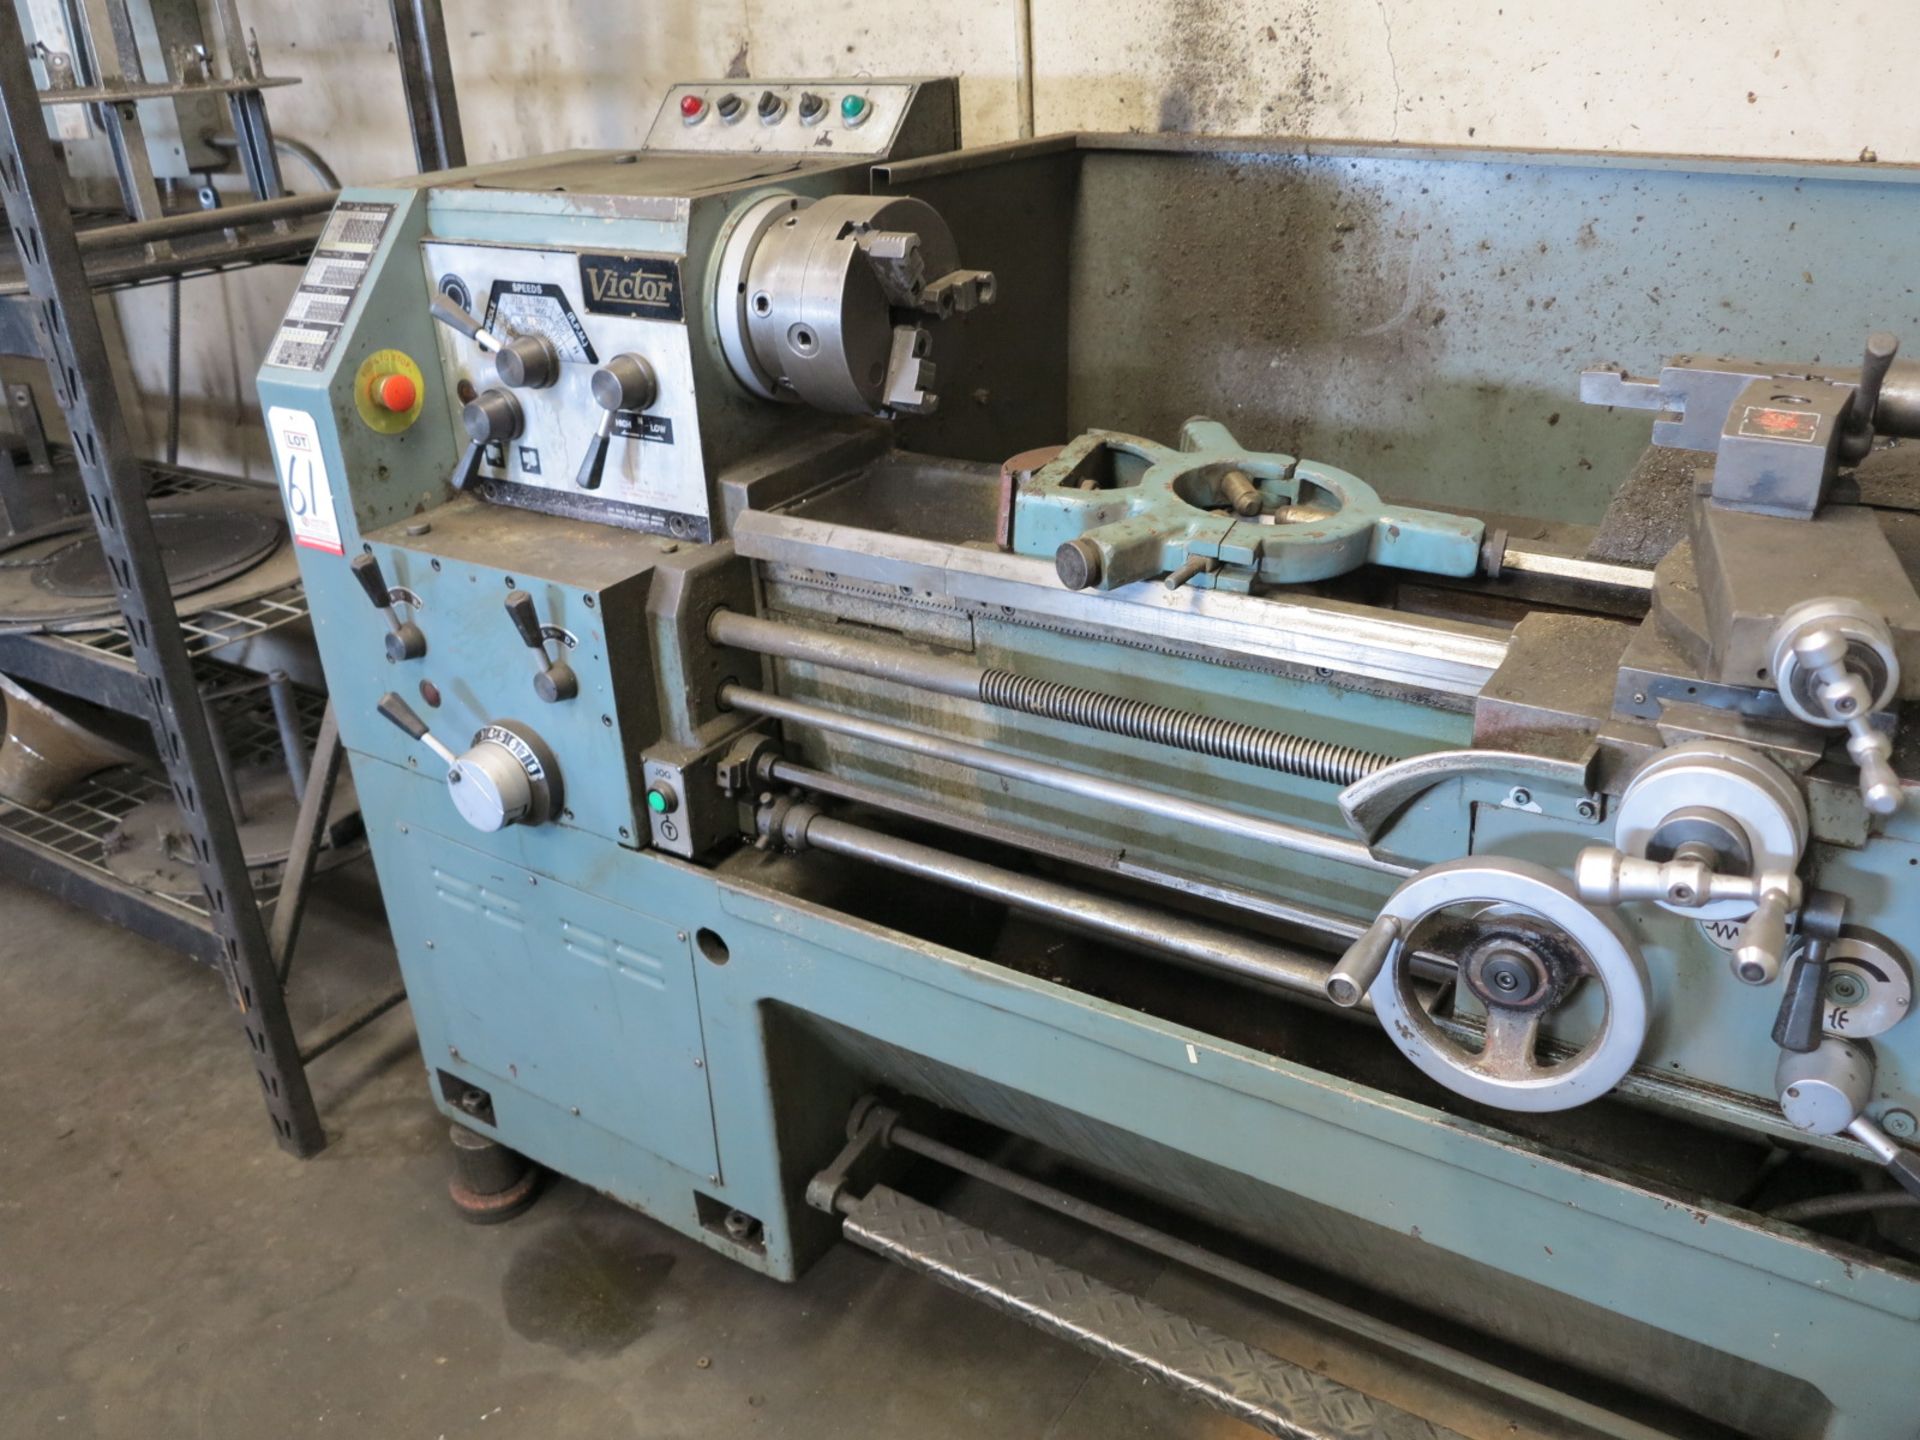 VICTOR 1640 LATHE, W/ 8" 3-JAW CHUCK, STEADY REST, TAILSTOCK - Image 2 of 3